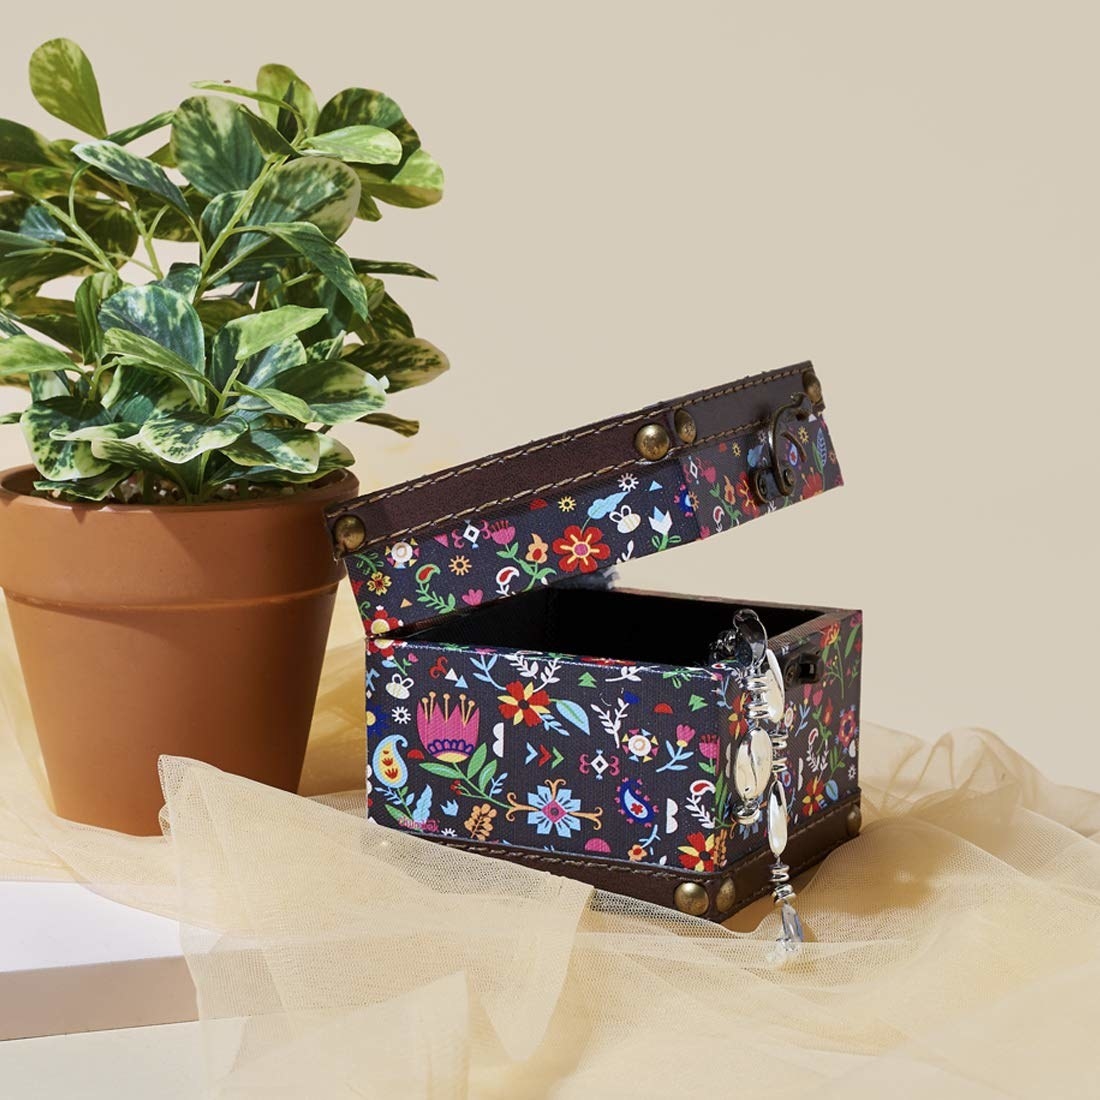 A black cloth storage box with colourful flowers and vines printed on it